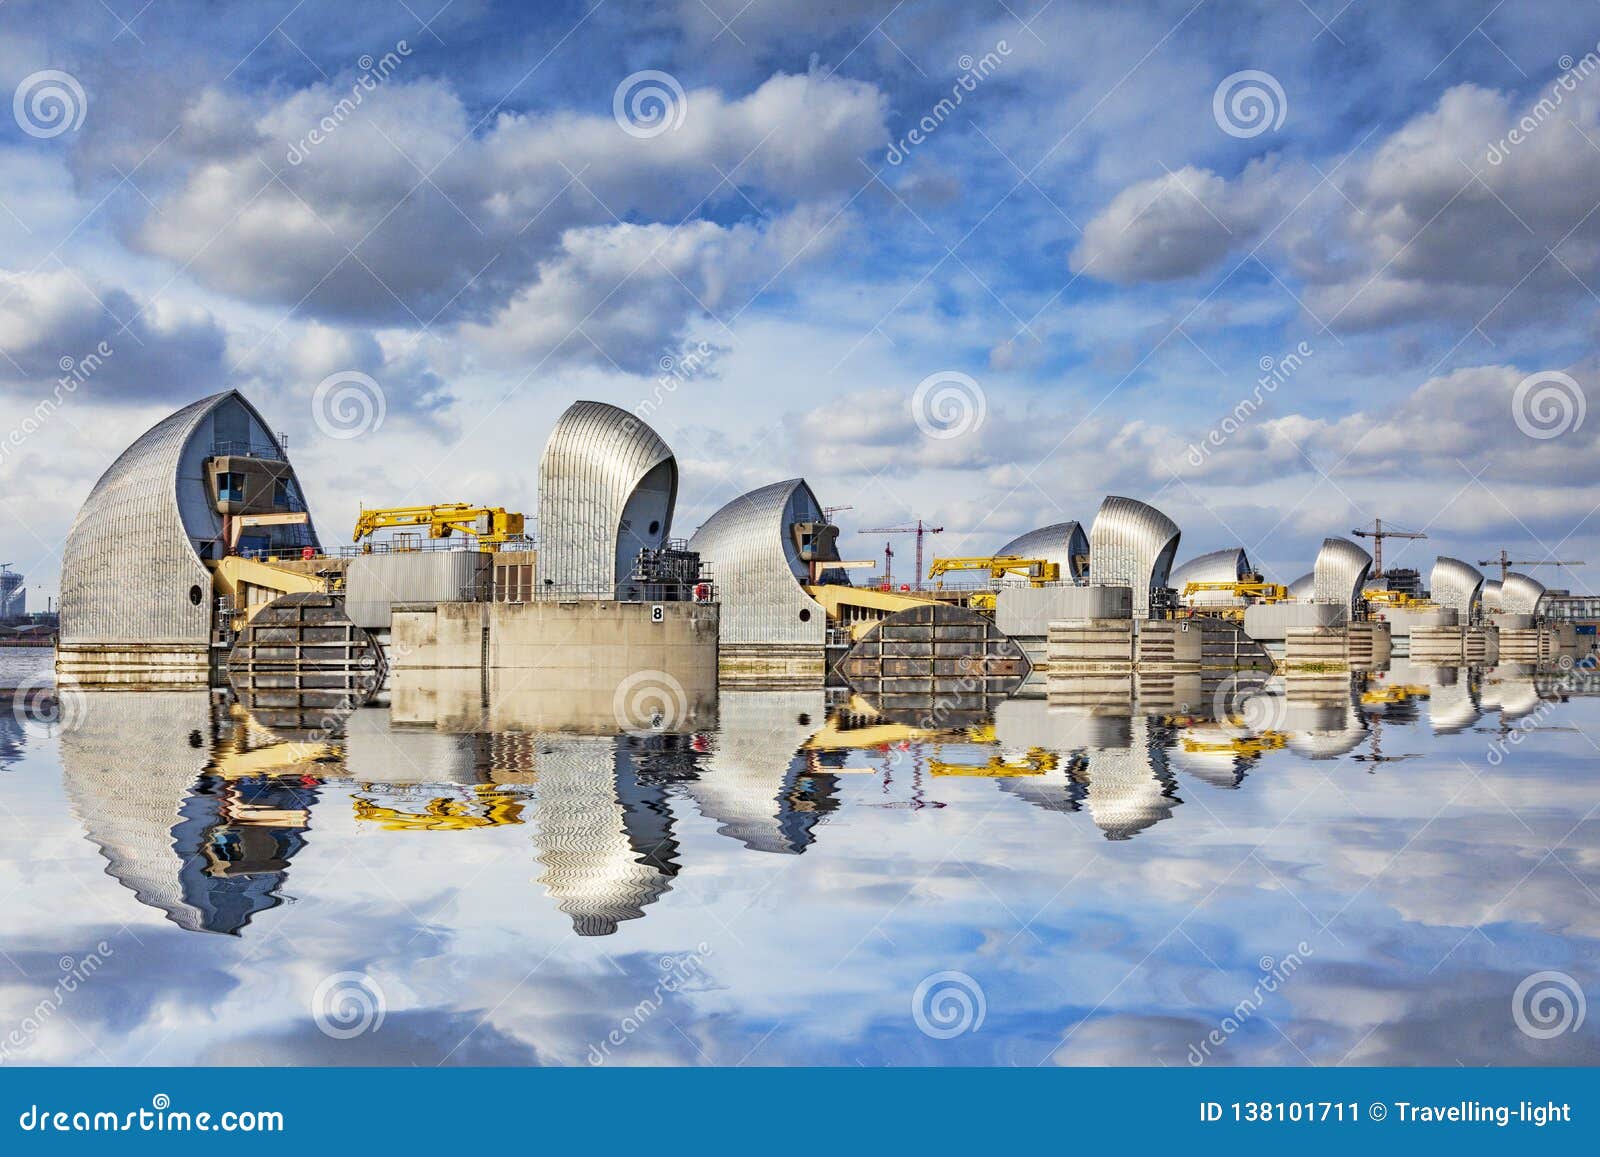 Thames Barrier Reflection London Uk Editorial Photo Image Of Thames Reflecting